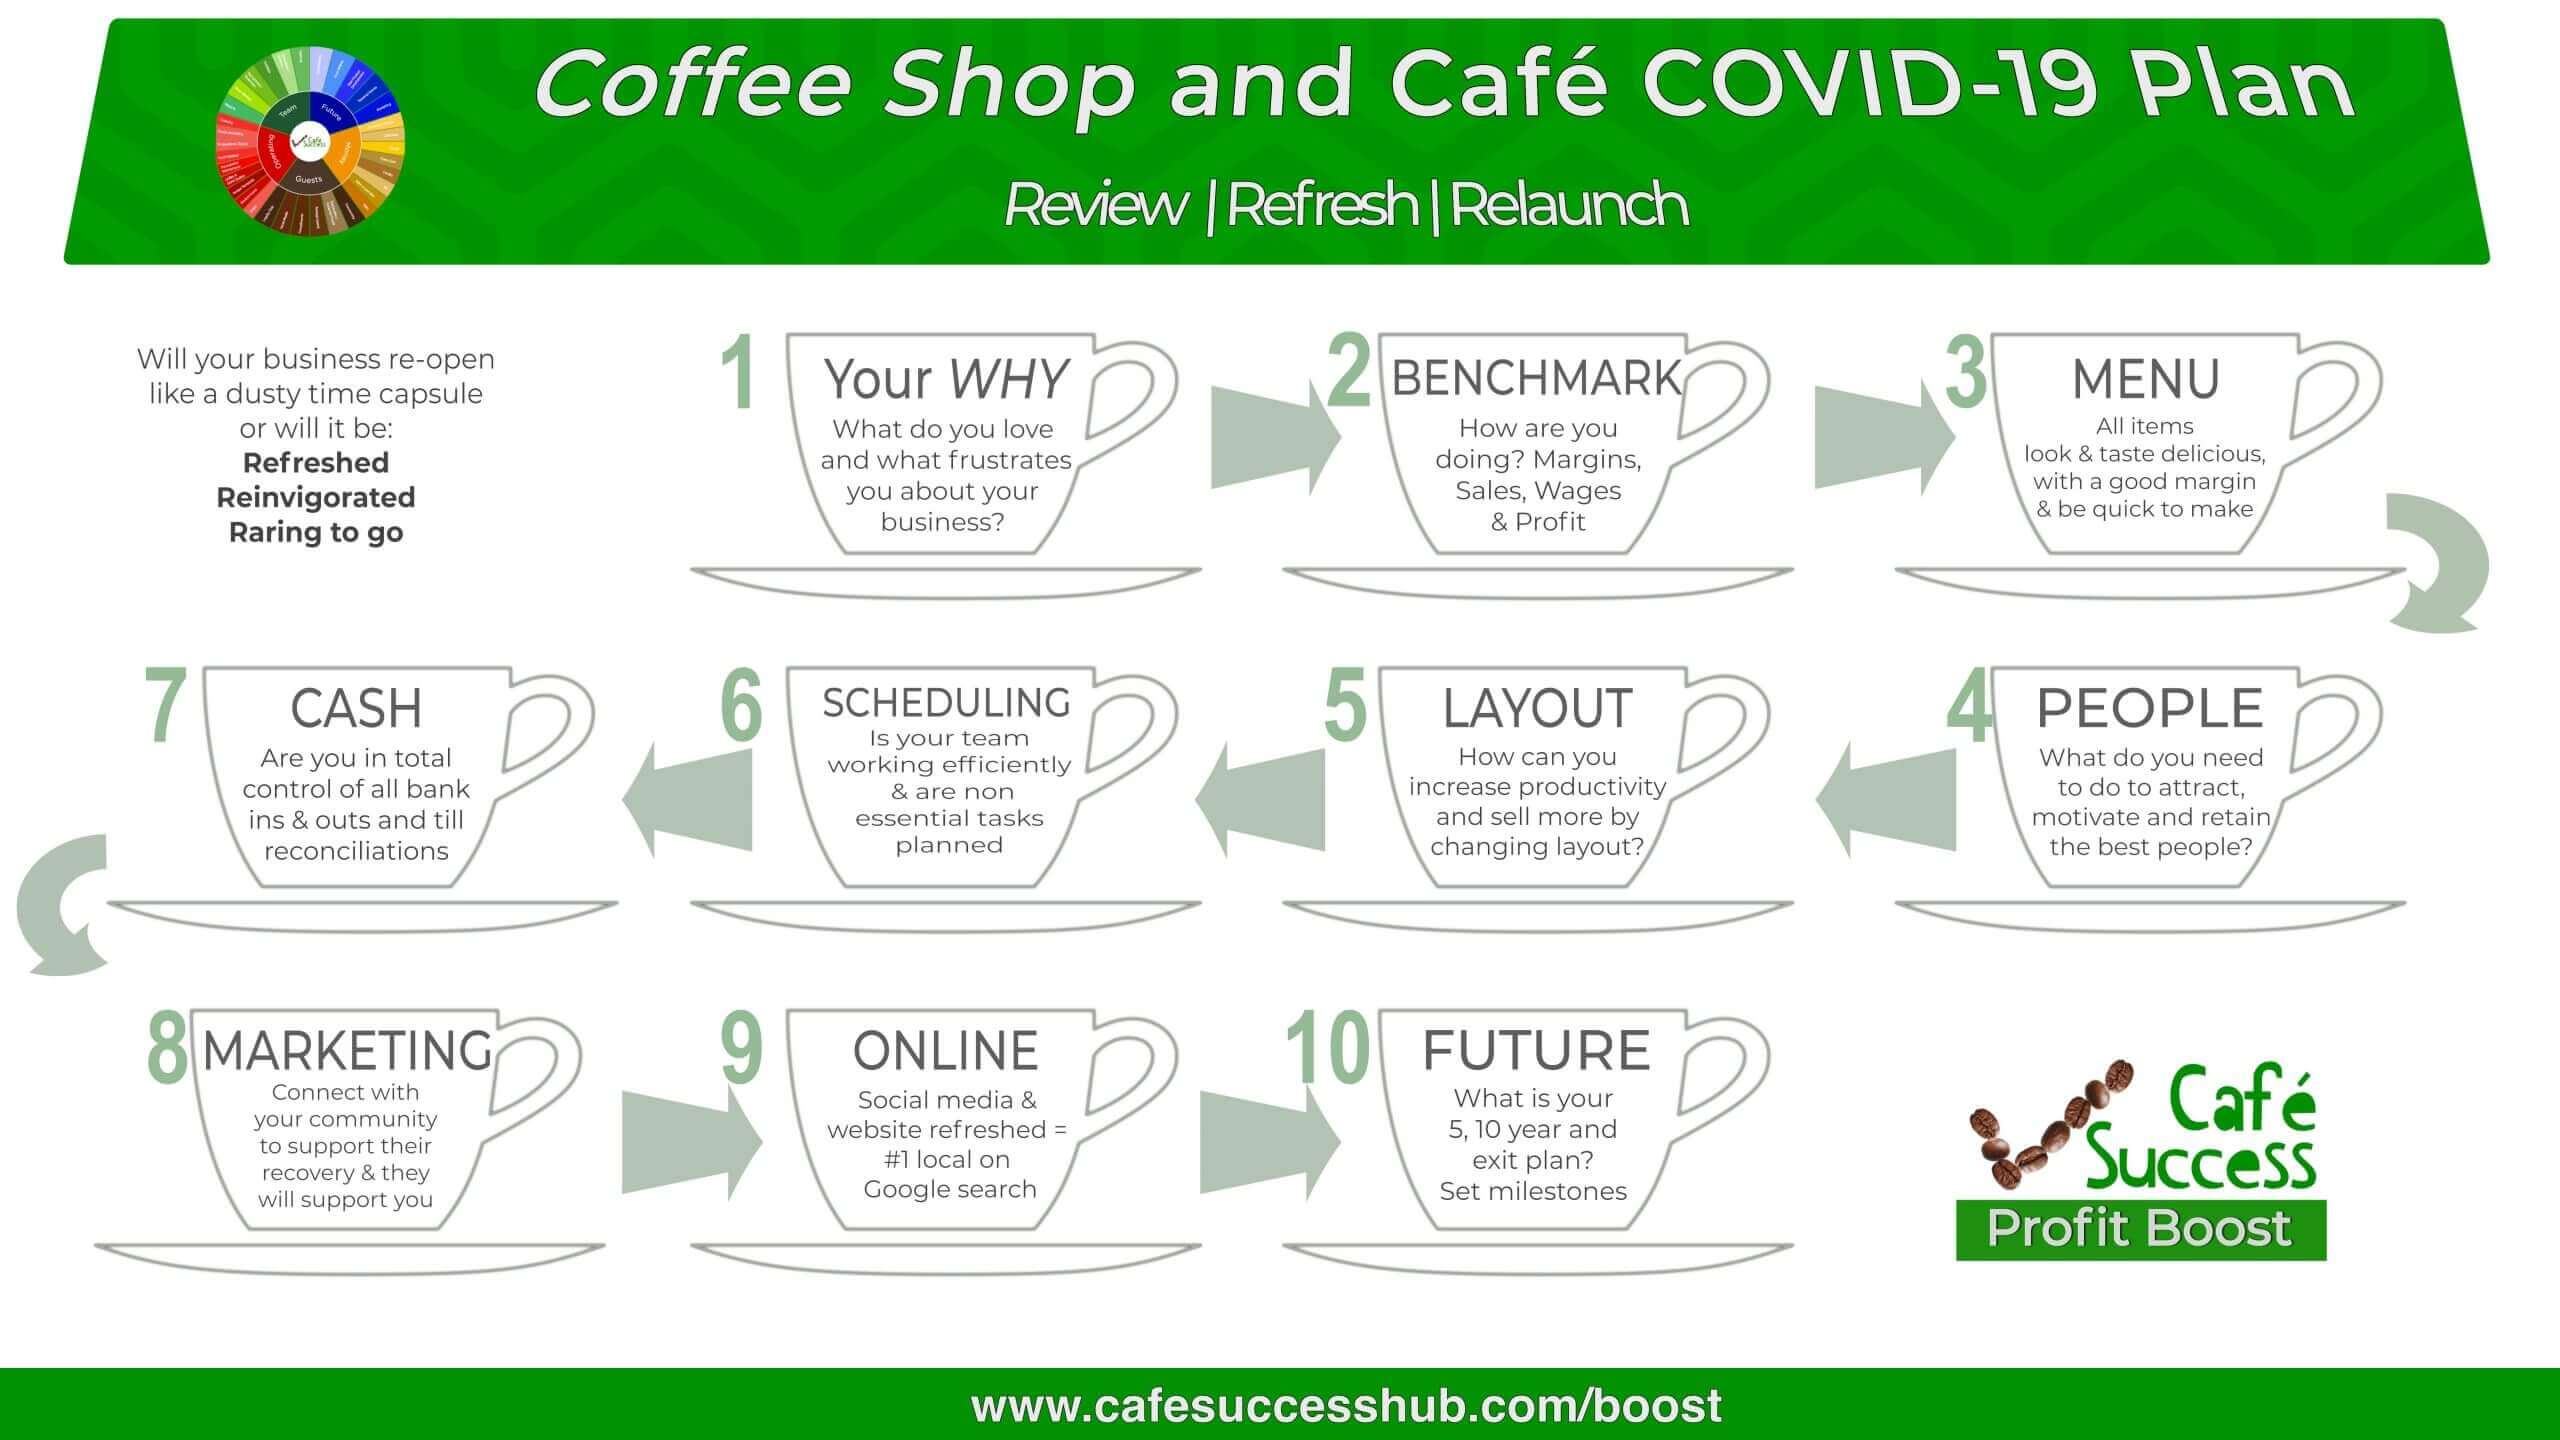 The COVID-19 crisis impacts on coffee shops, cafes and restaurants across the world.